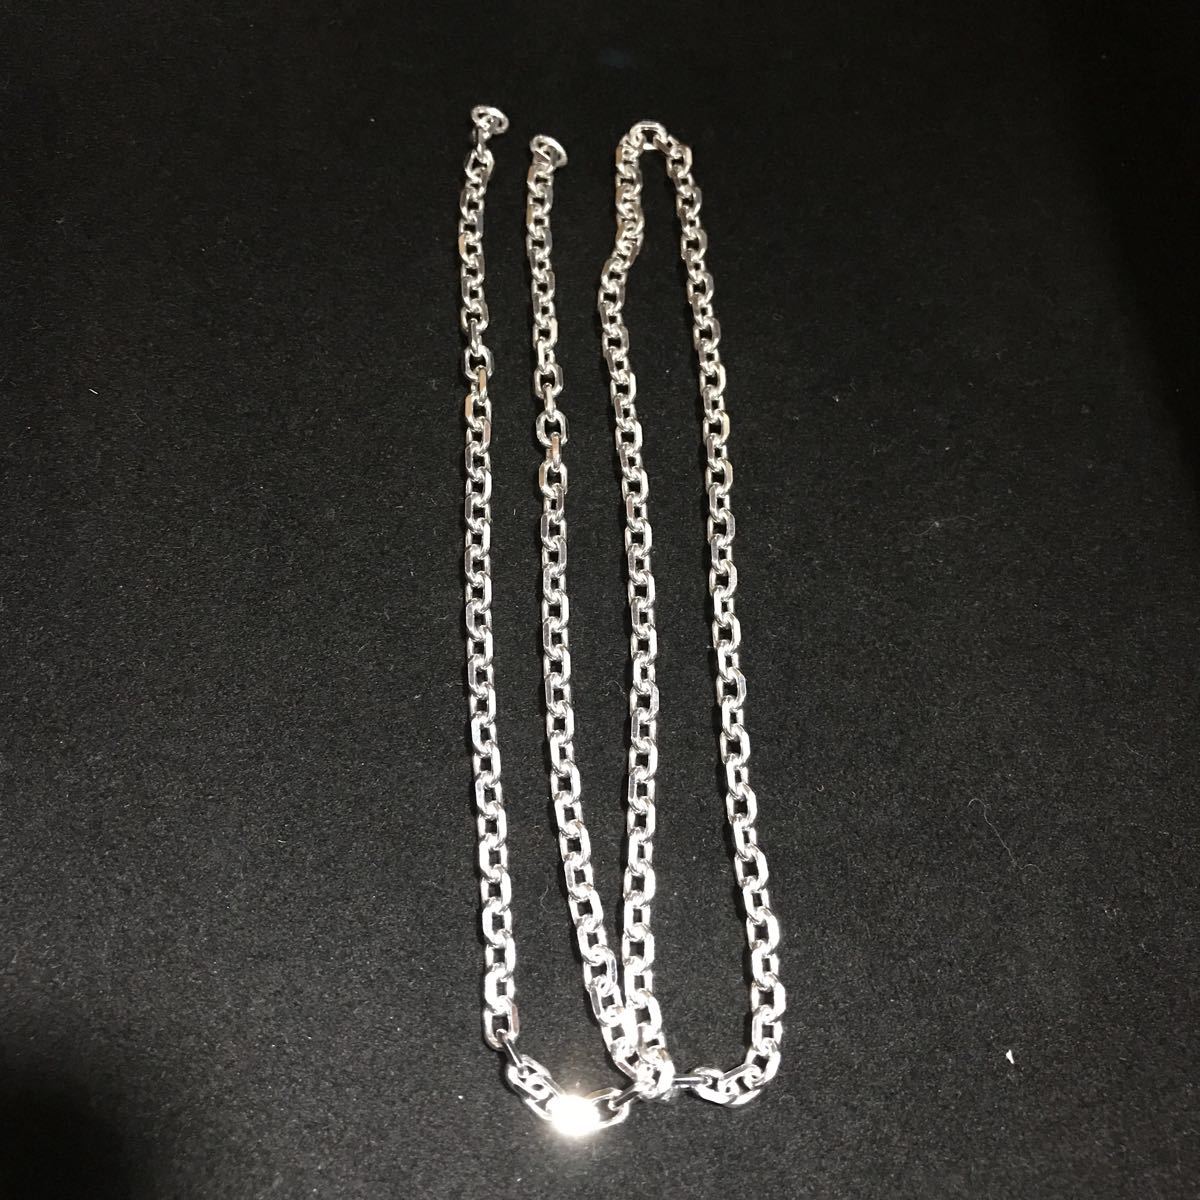  new goods unused * small angle chain *